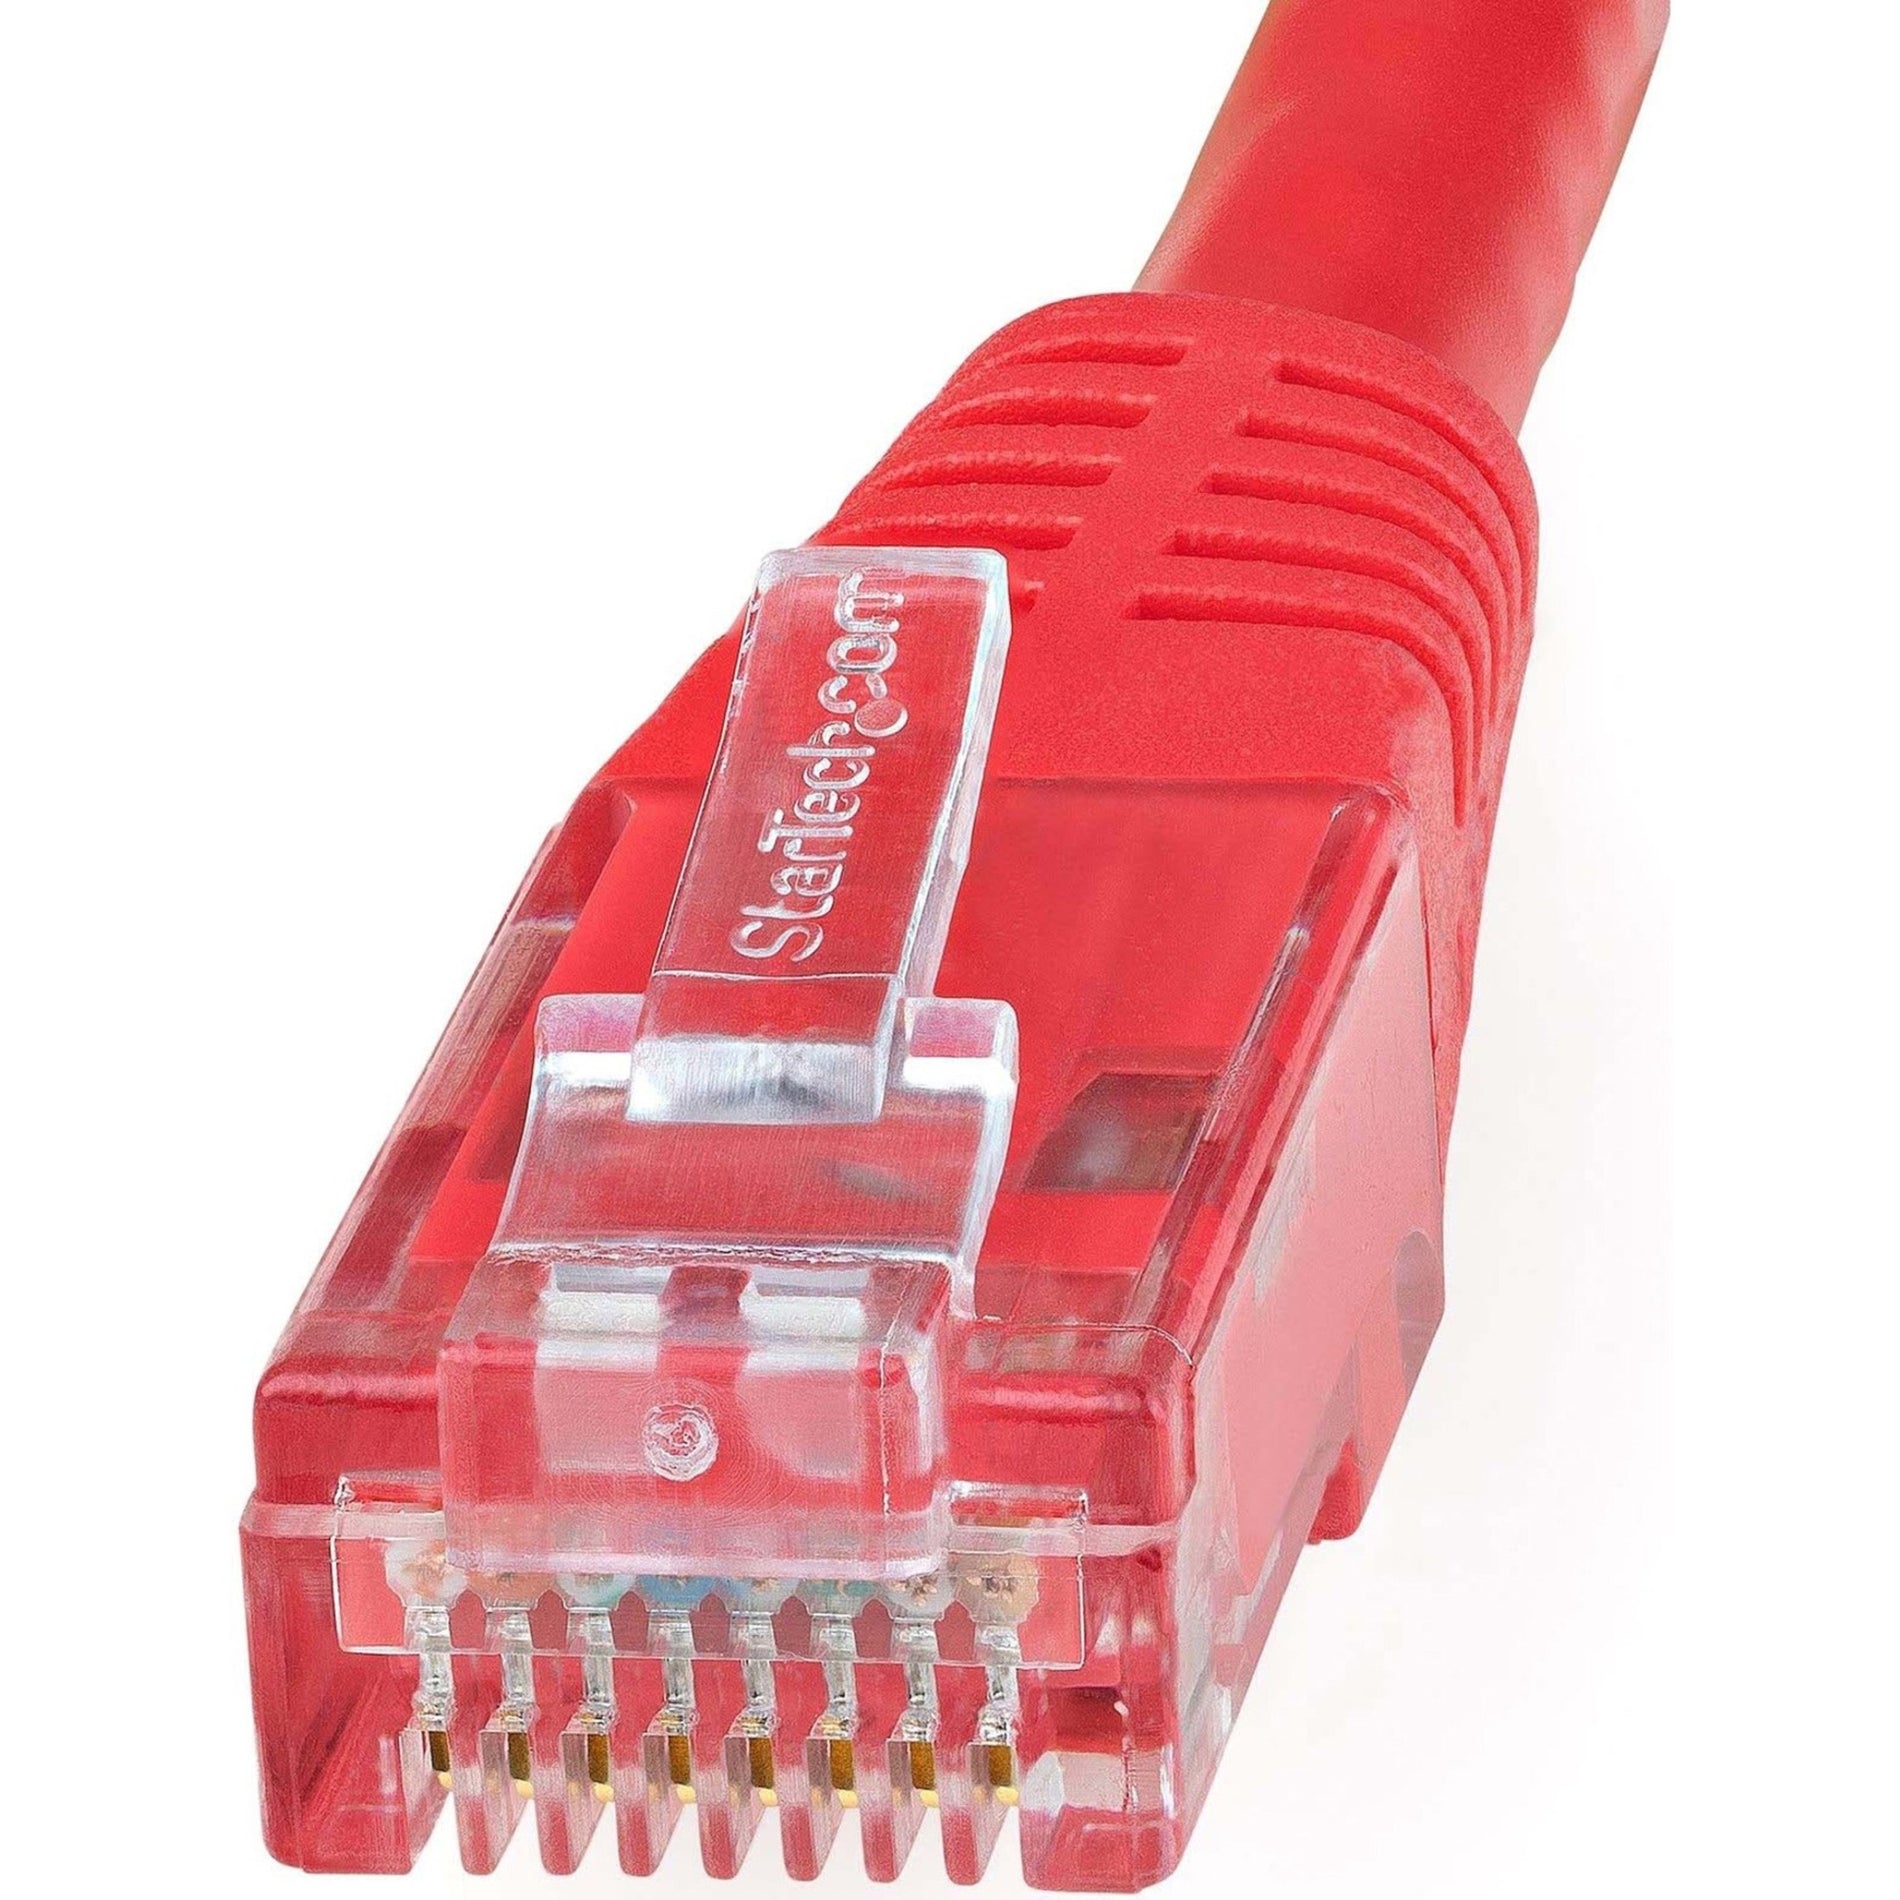 StarTech.com C6PATCH6RD 6ft Red Cat6 UTP Patch Cable ETL Verified, 10 Gbit/s Data Transfer Rate, Strain Relief